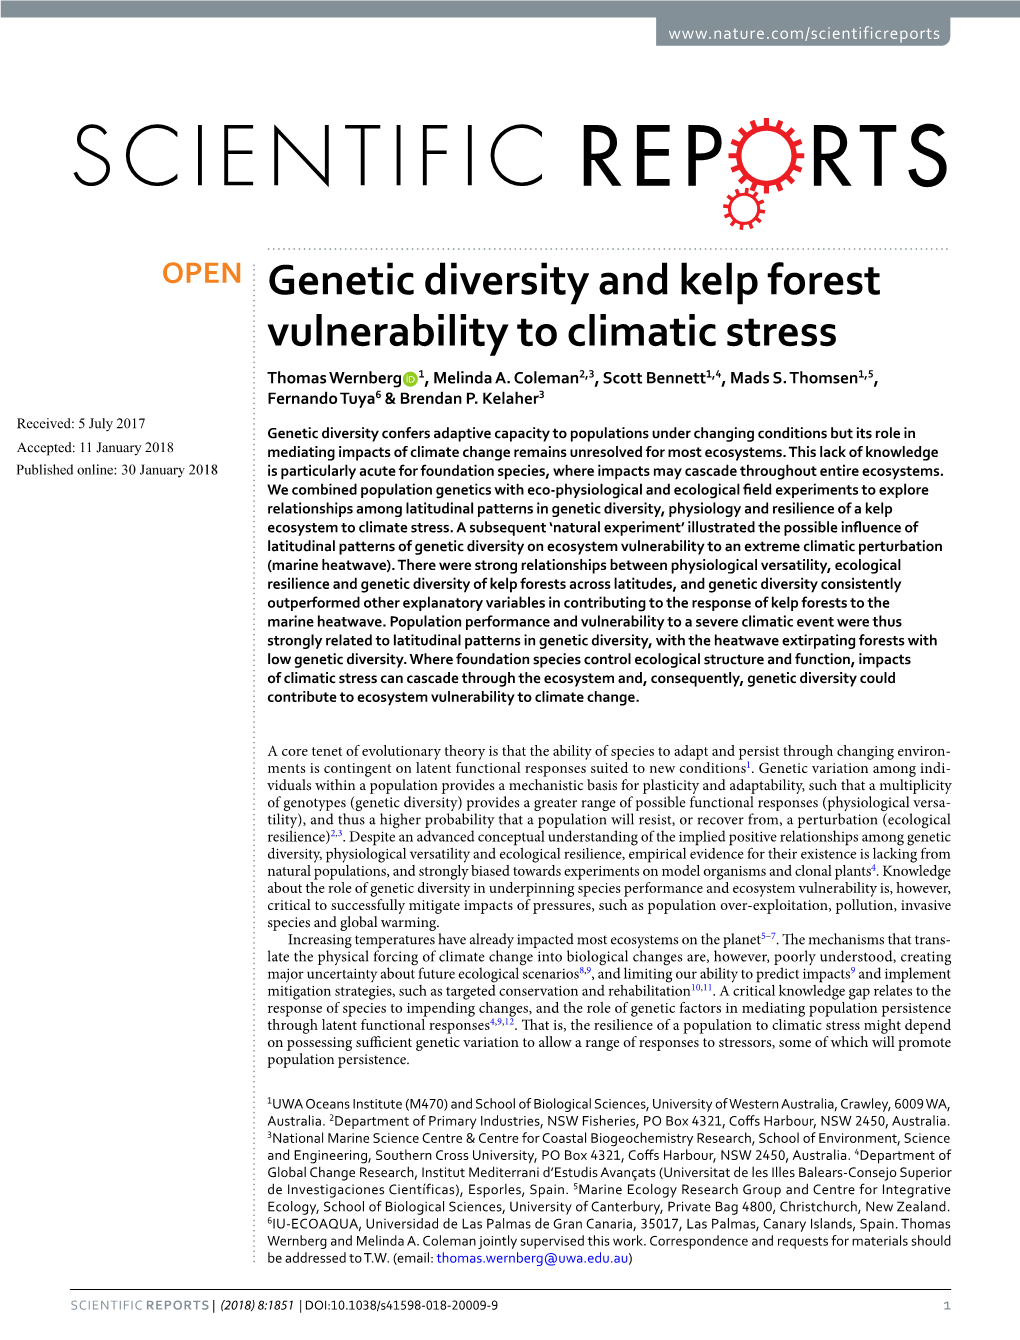 Genetic Diversity and Kelp Forest Vulnerability to Climatic Stress Thomas Wernberg 1, Melinda A